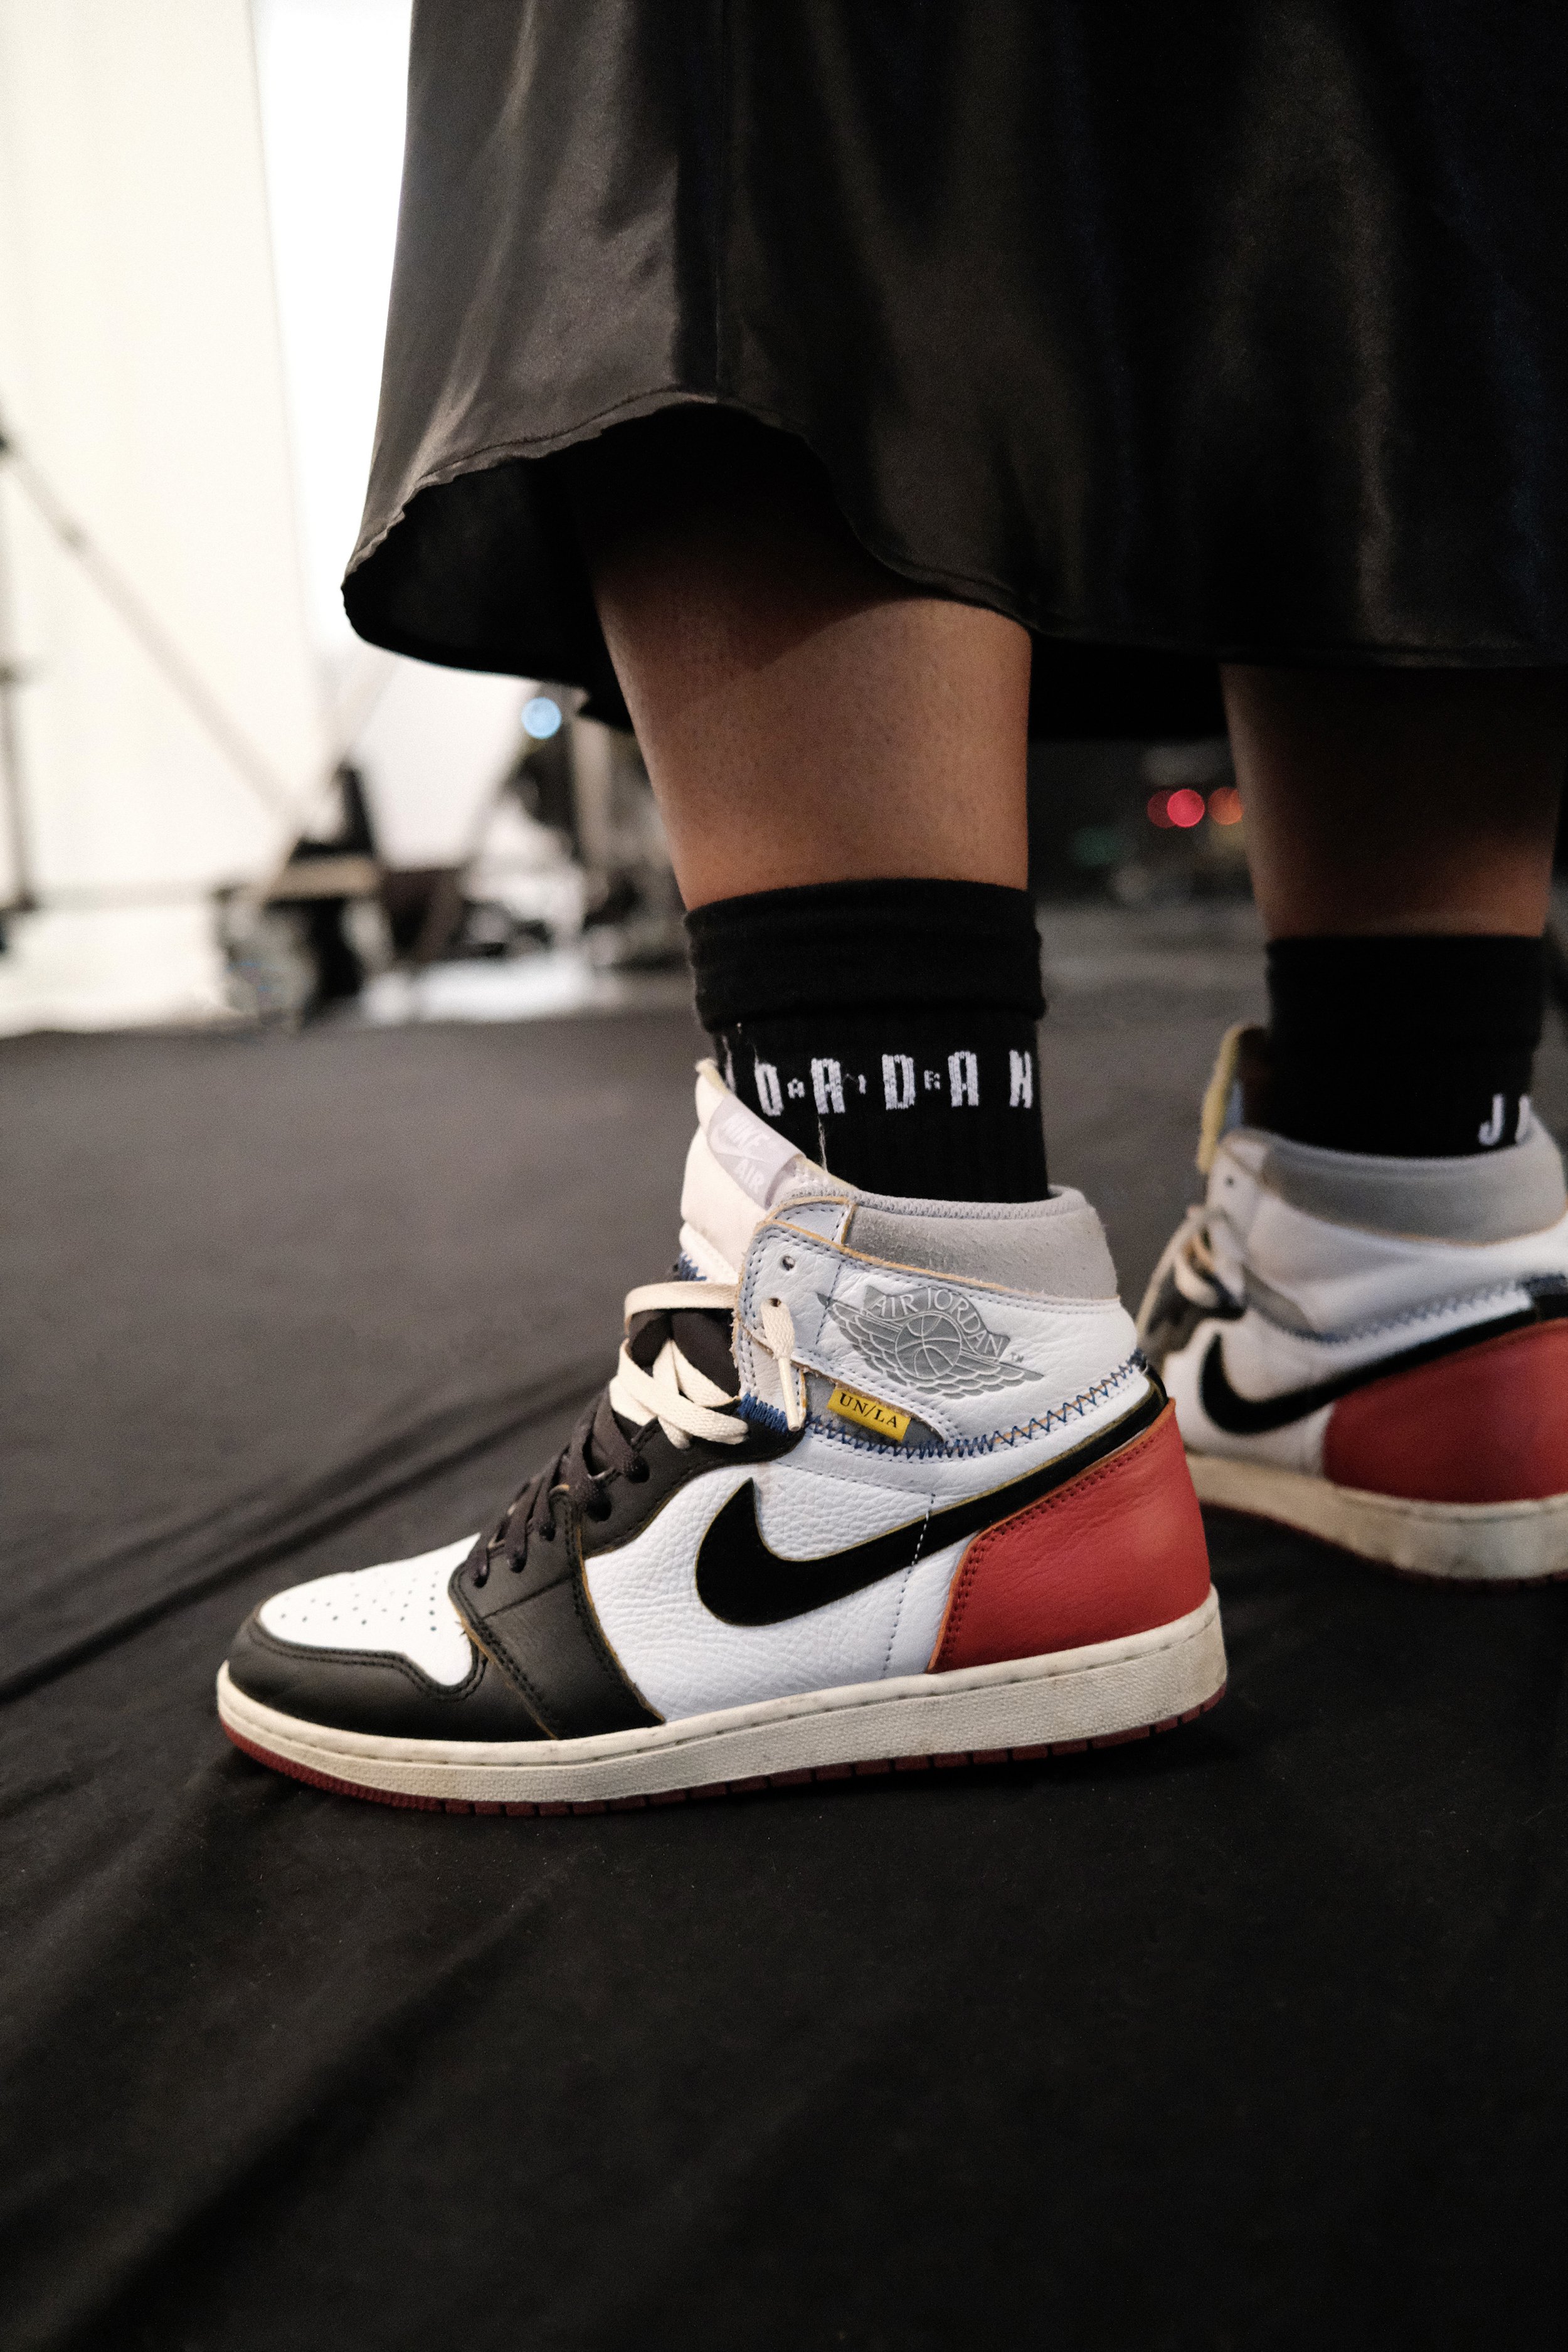 Dear Ladies, here's the right way to style the Air Jordan 1 - YOMZANSI.  Documenting THE CULTURE